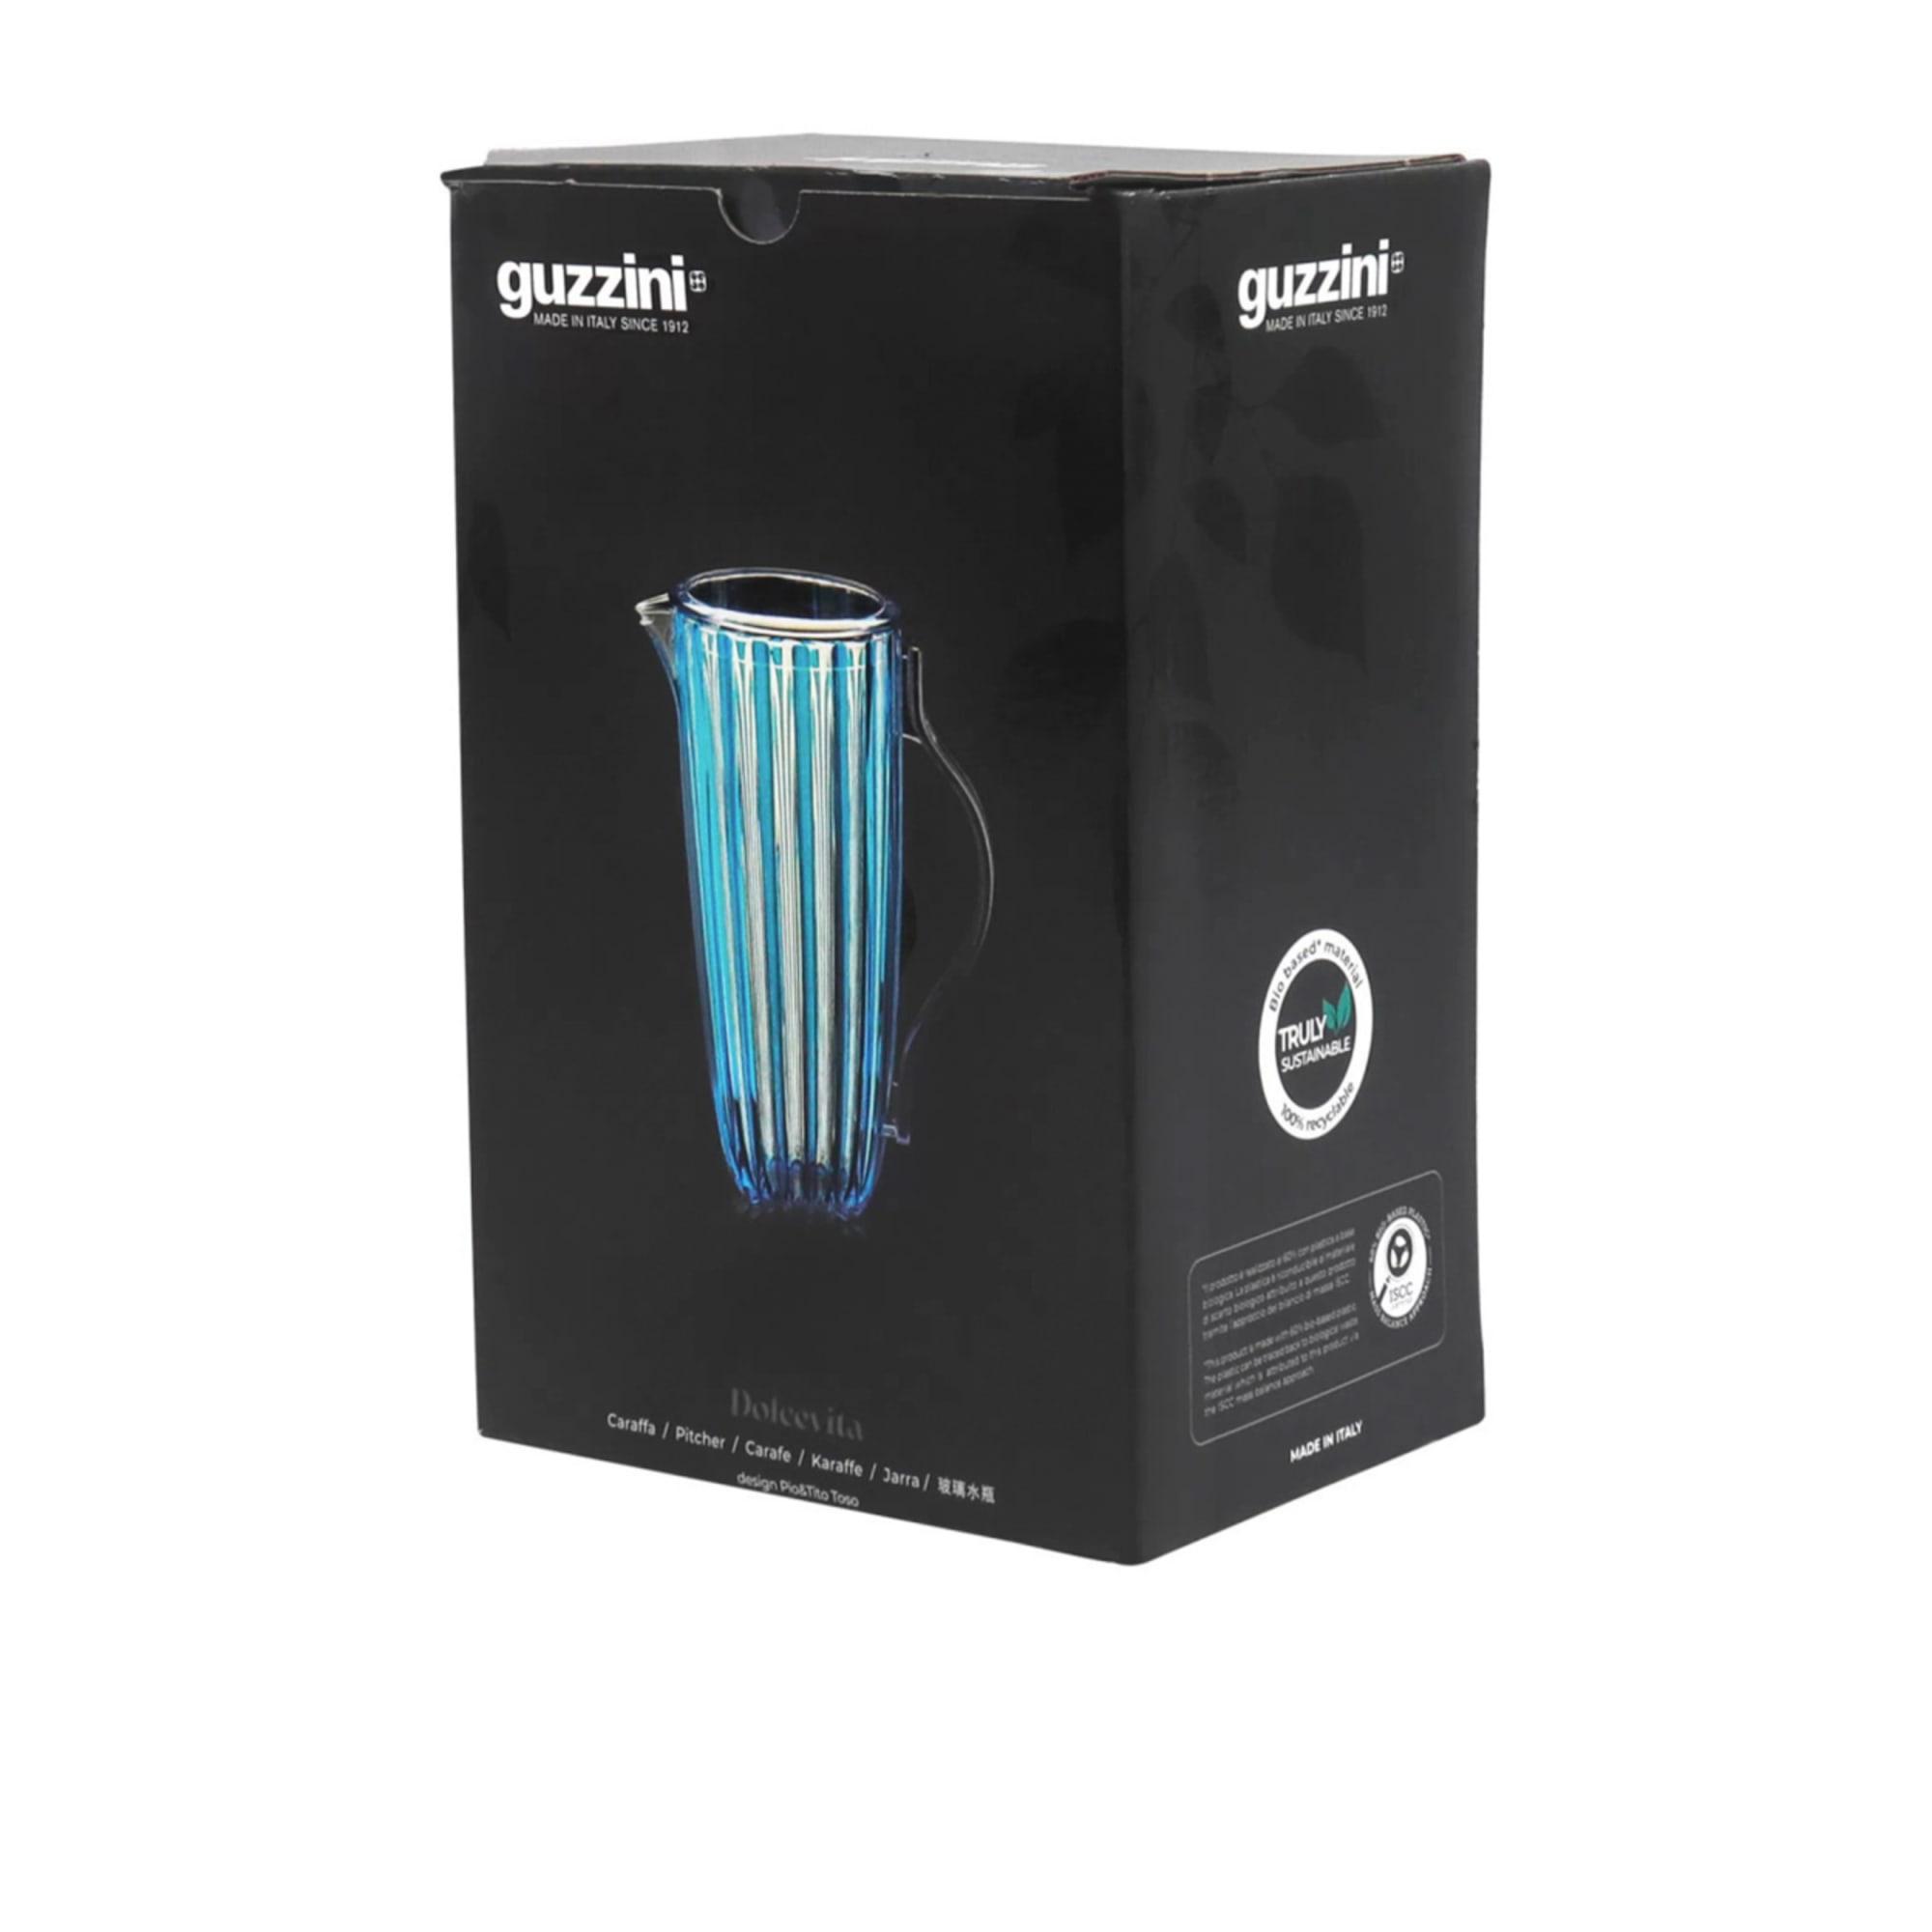 Guzzini Dolcevita Pitcher with Lid 1.8L Turquoise Image 3